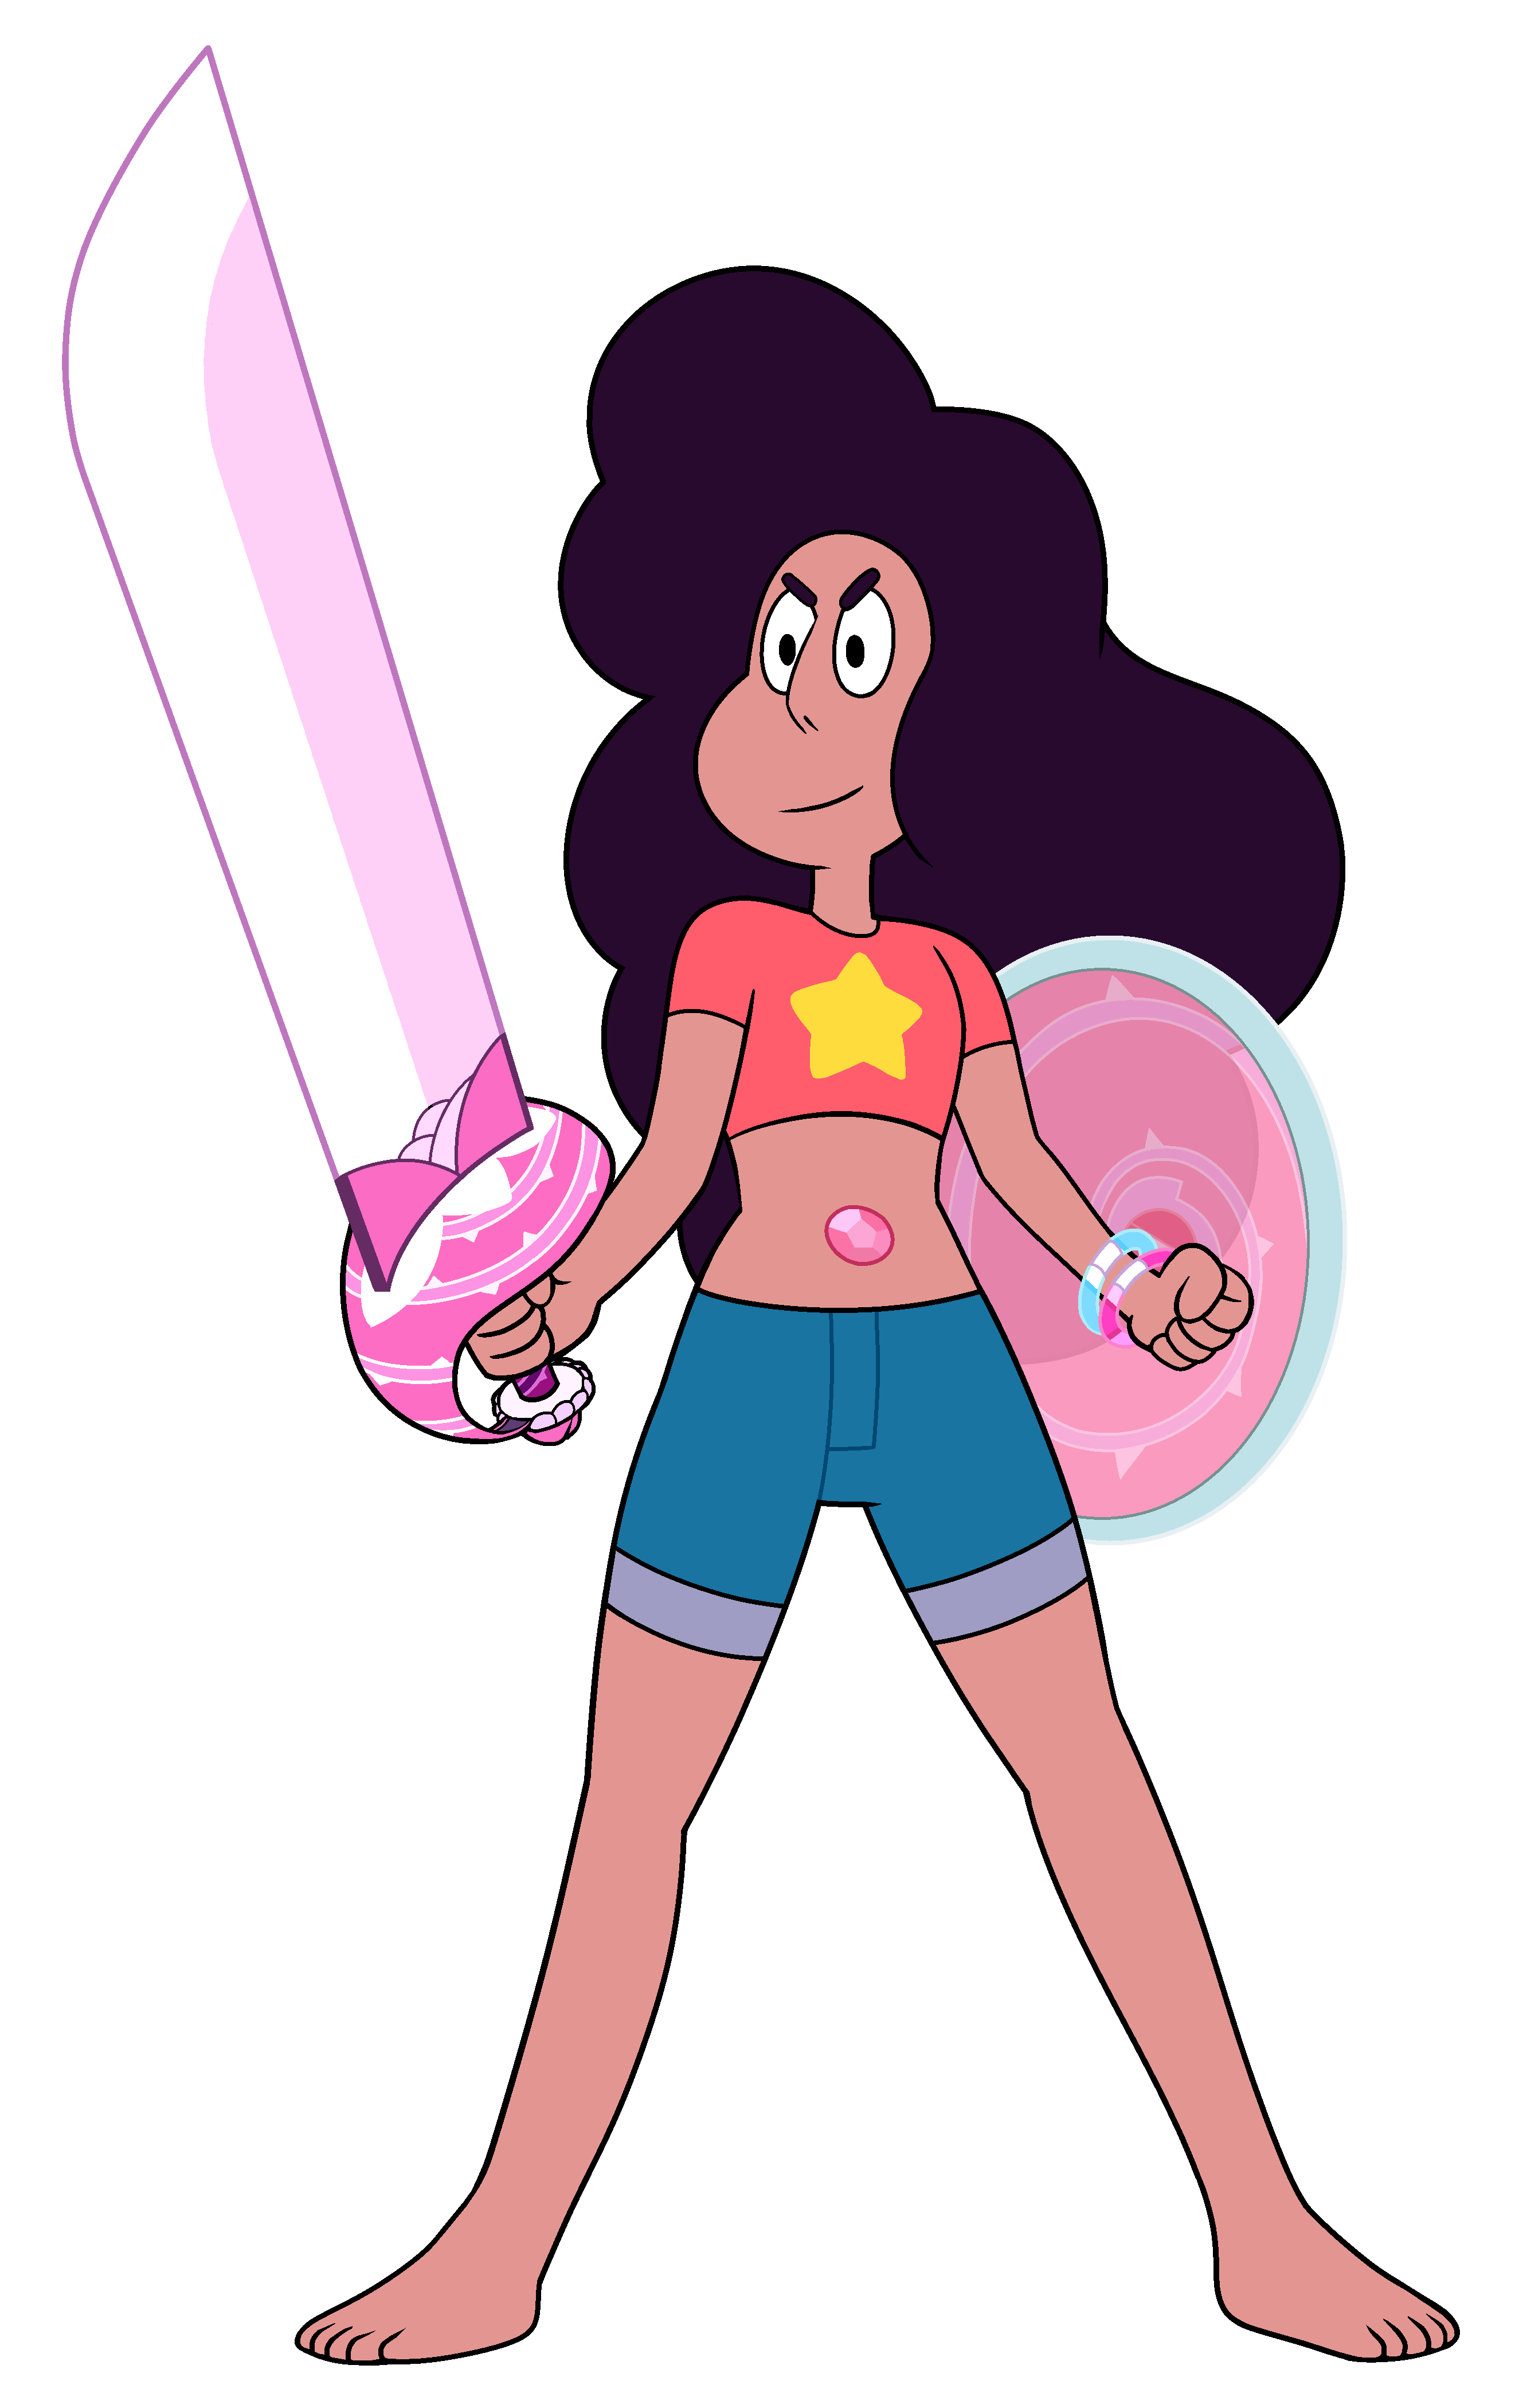 Image stevonnie sword shield. Whip clipart cracked